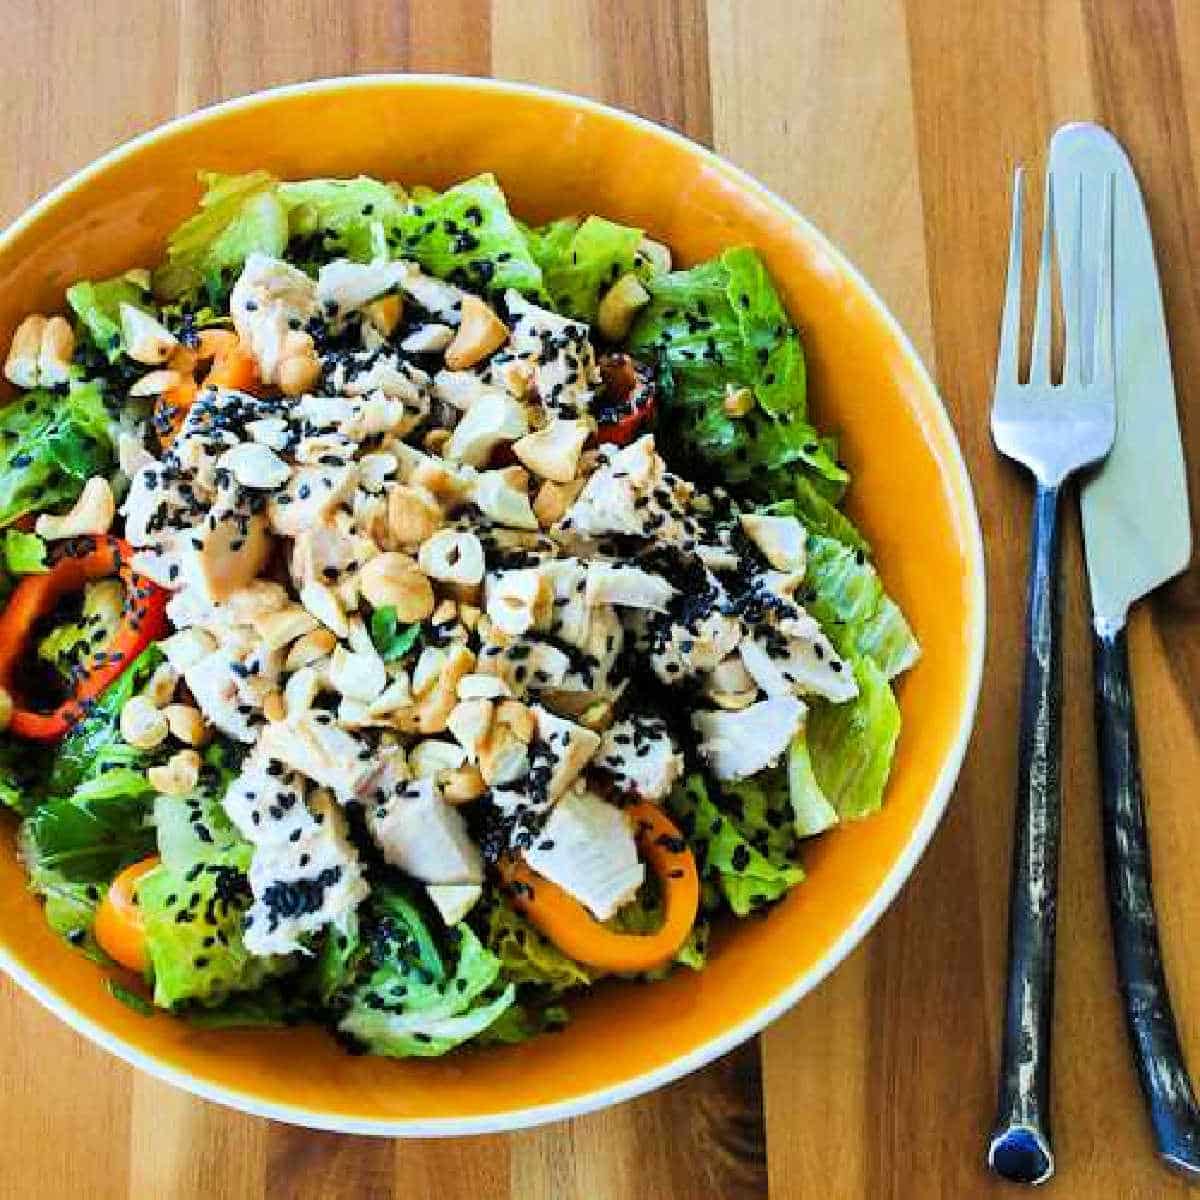 Asian Chopped Chicken Salad shown in serving bowl with knife and fork.